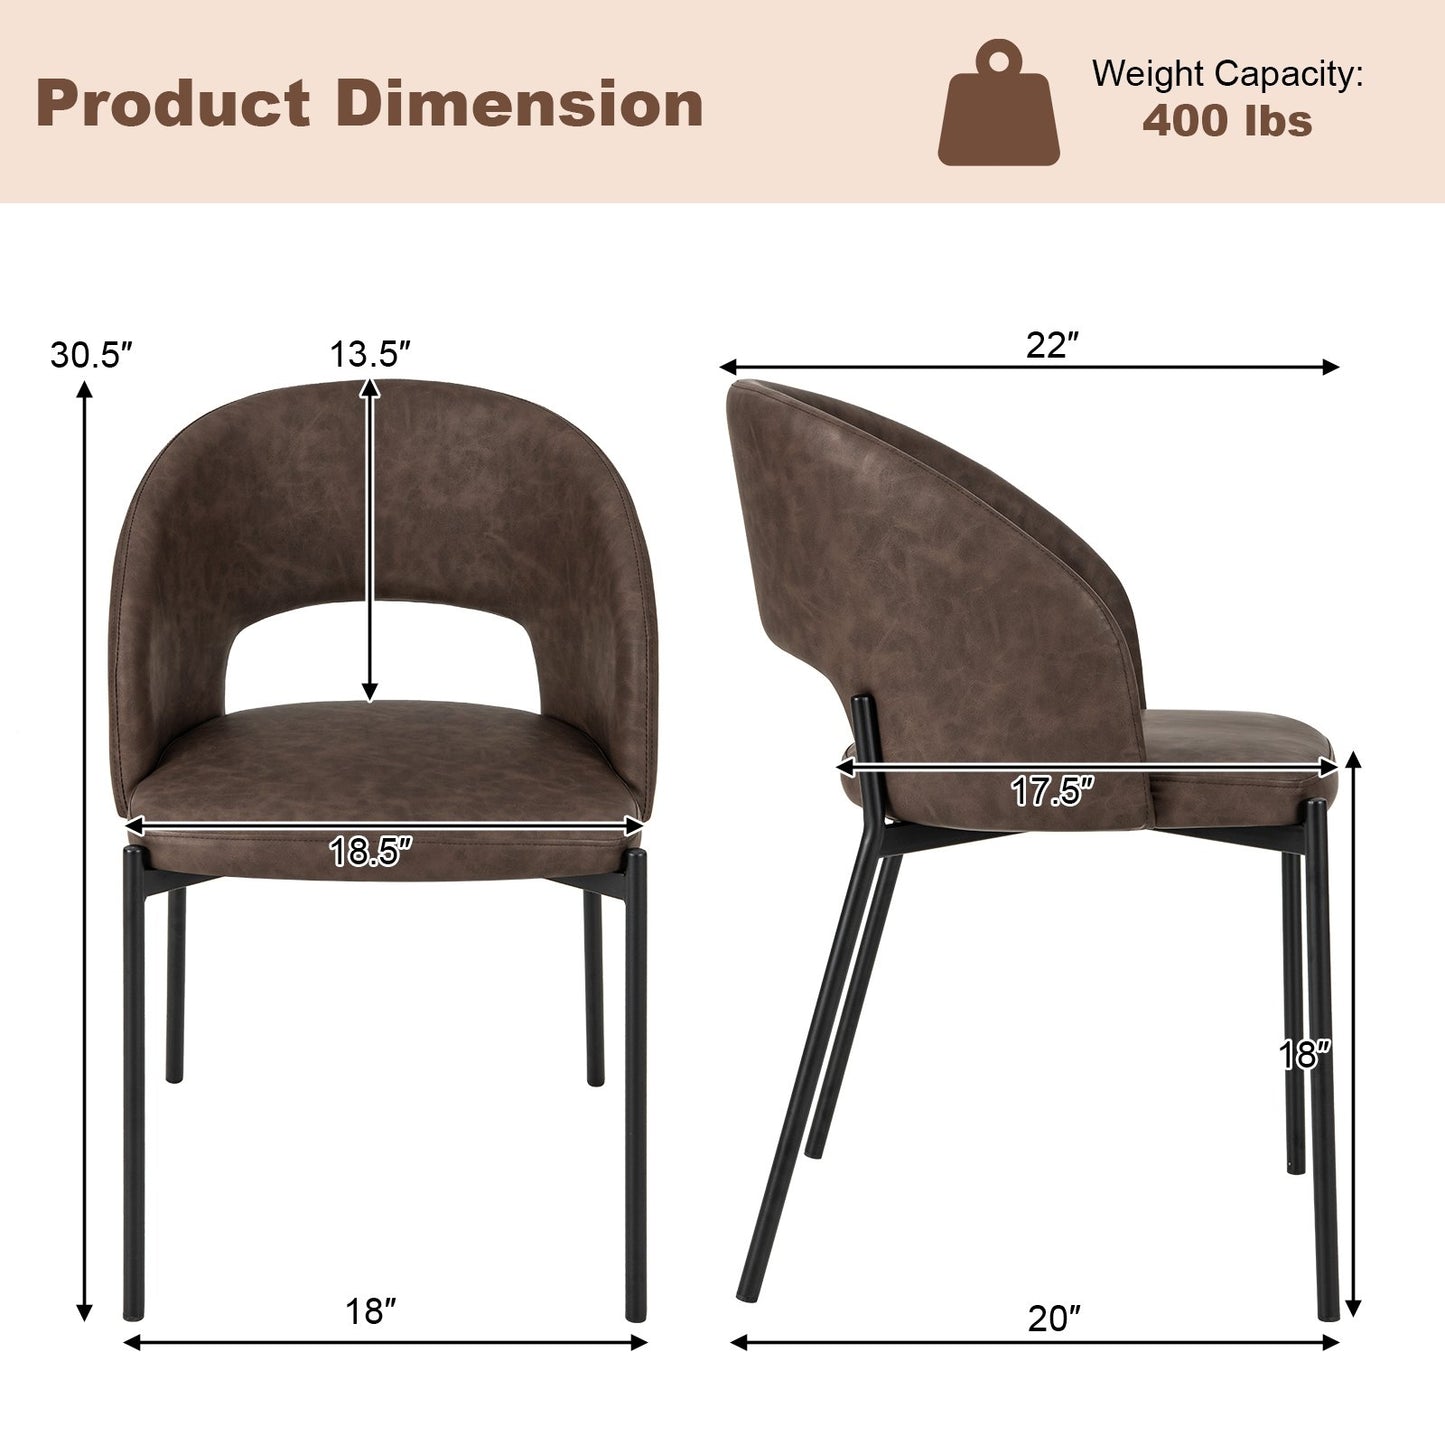 Dining Chair Set of 2 with High-density Sponge Cushion and PU Leather, Brown